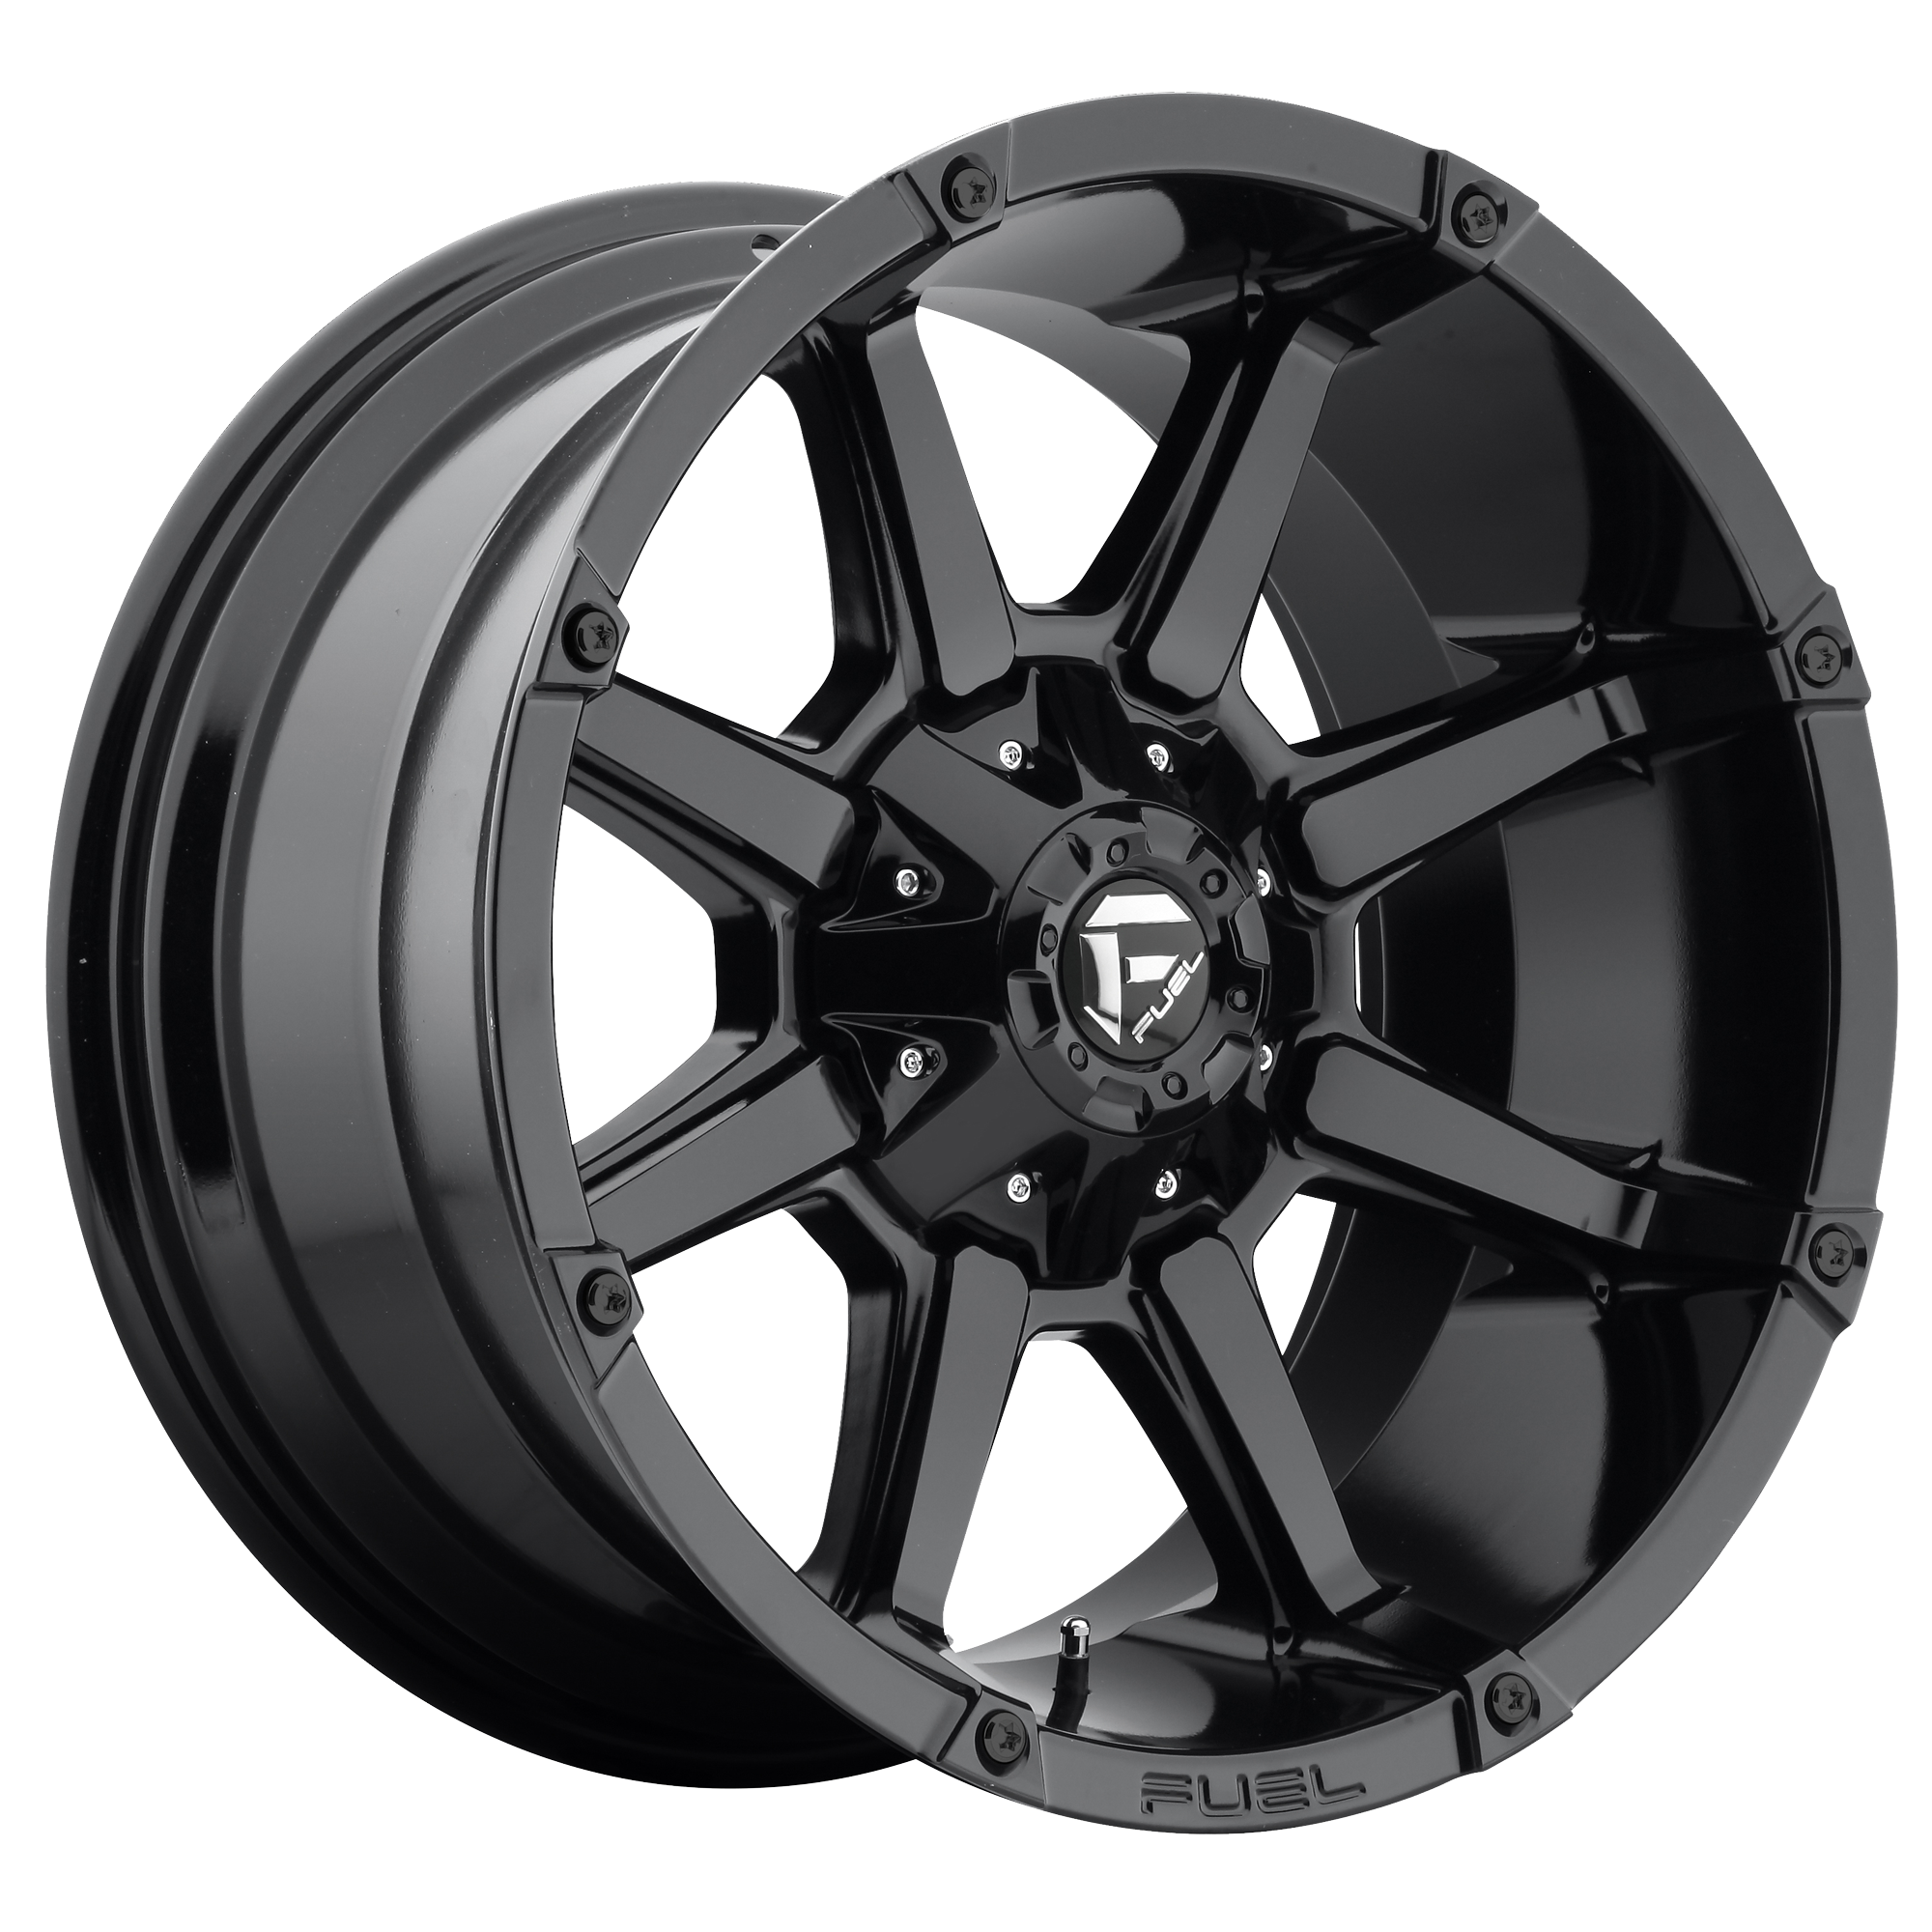 COUPLER 20x9 5x114.30/5x127.00 GLOSS BLACK (1 mm) - Tires and Engine Performance